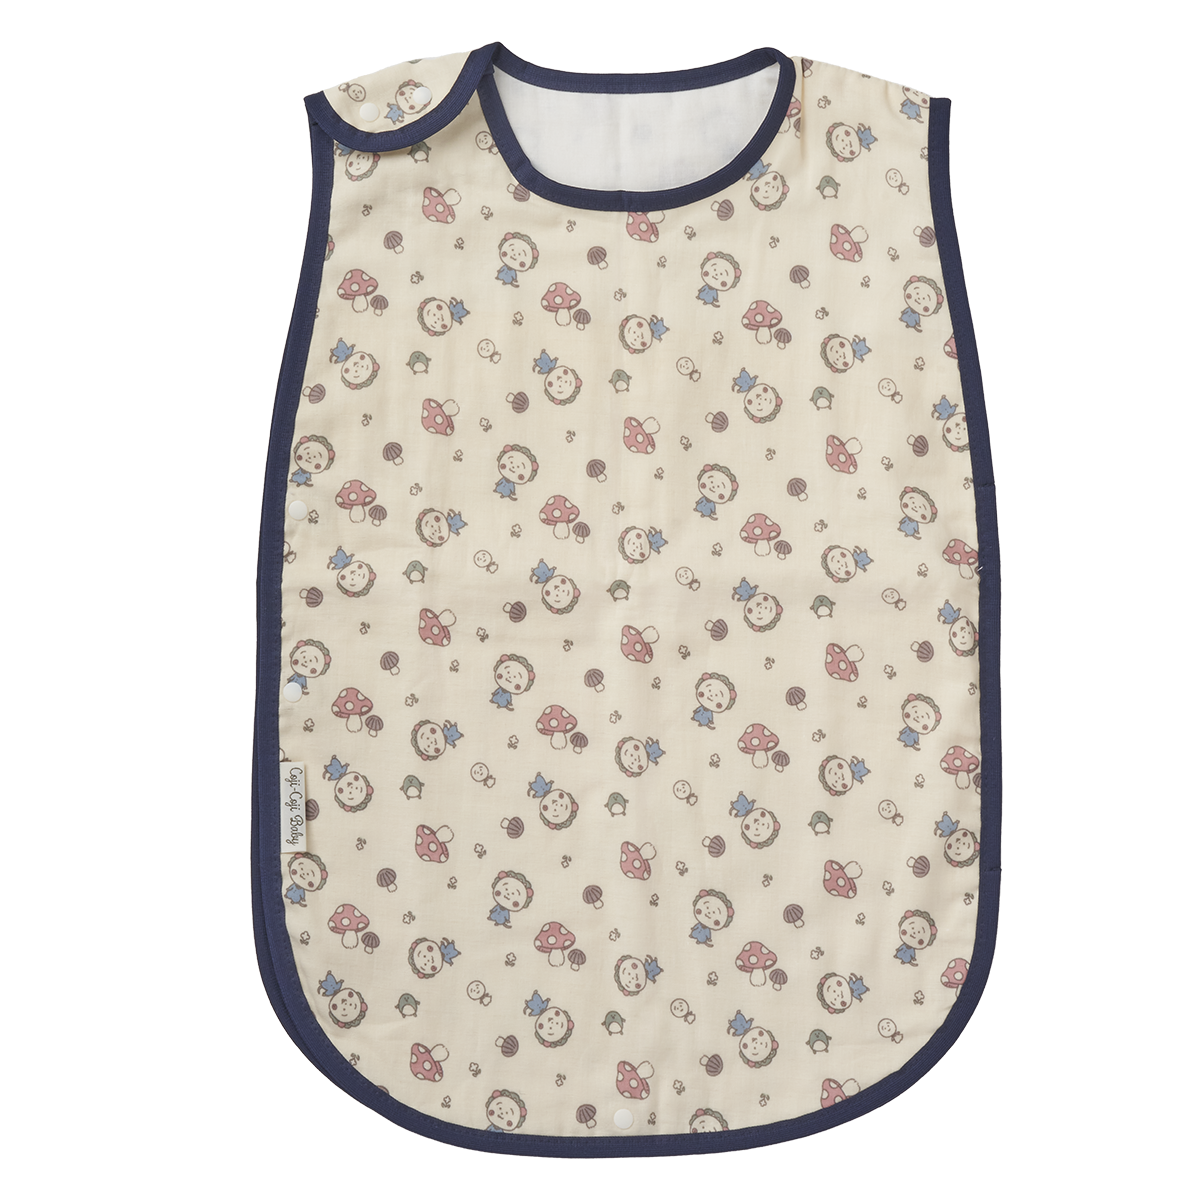 Apparel & Accessories > Clothing > Baby & Toddler Clothing > Baby & Toddler Sleepwear